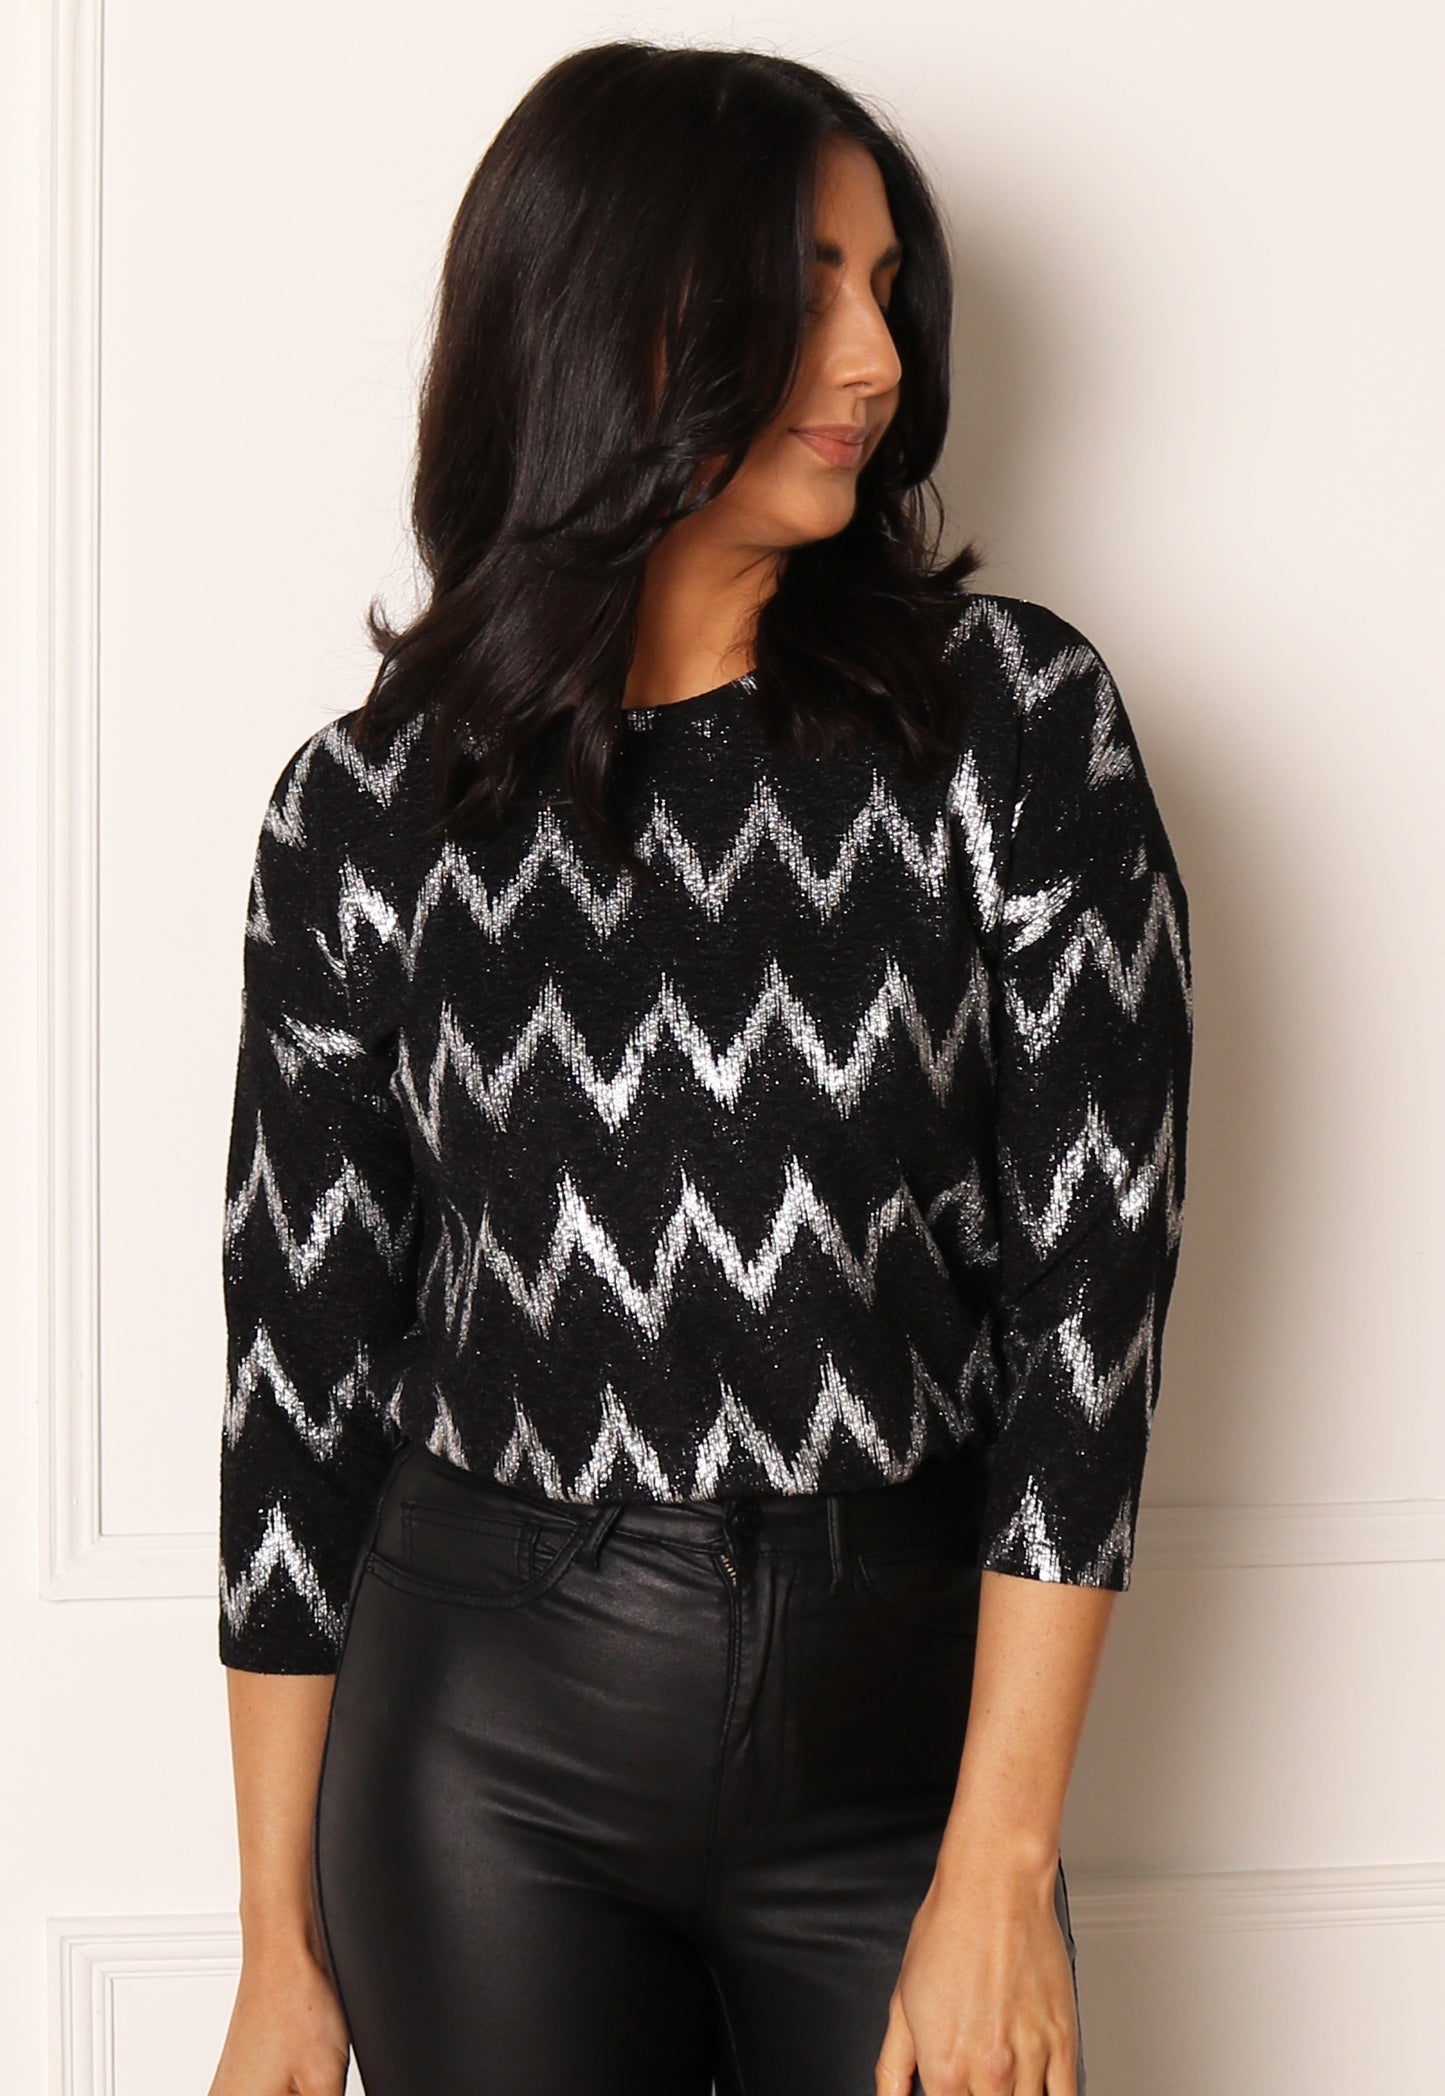 ONLY Queen Metallic Zig Zag Top with Three Quarter Sleeves in Silver & Black - concretebartops